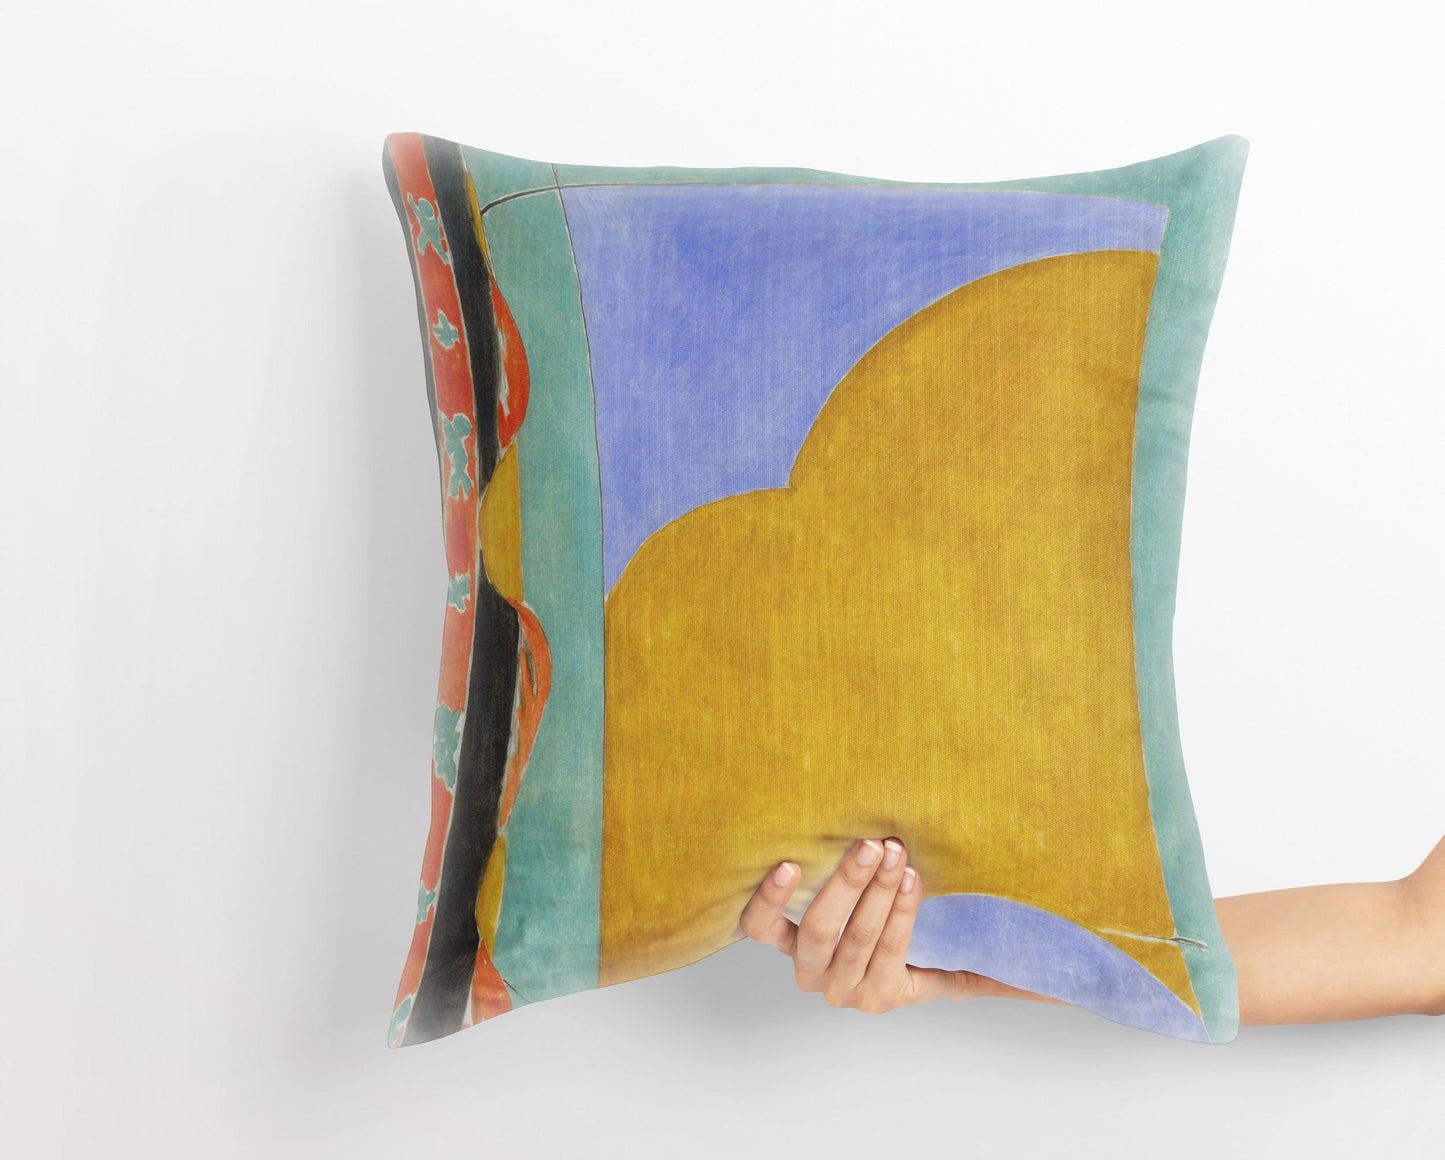 Henri Matisse Famous Painting, Throw Pillow, Abstract Pillow, Soft Pillow Cases, Colorful Pillow Case, Home Decor Pillow, Sofa Pillows